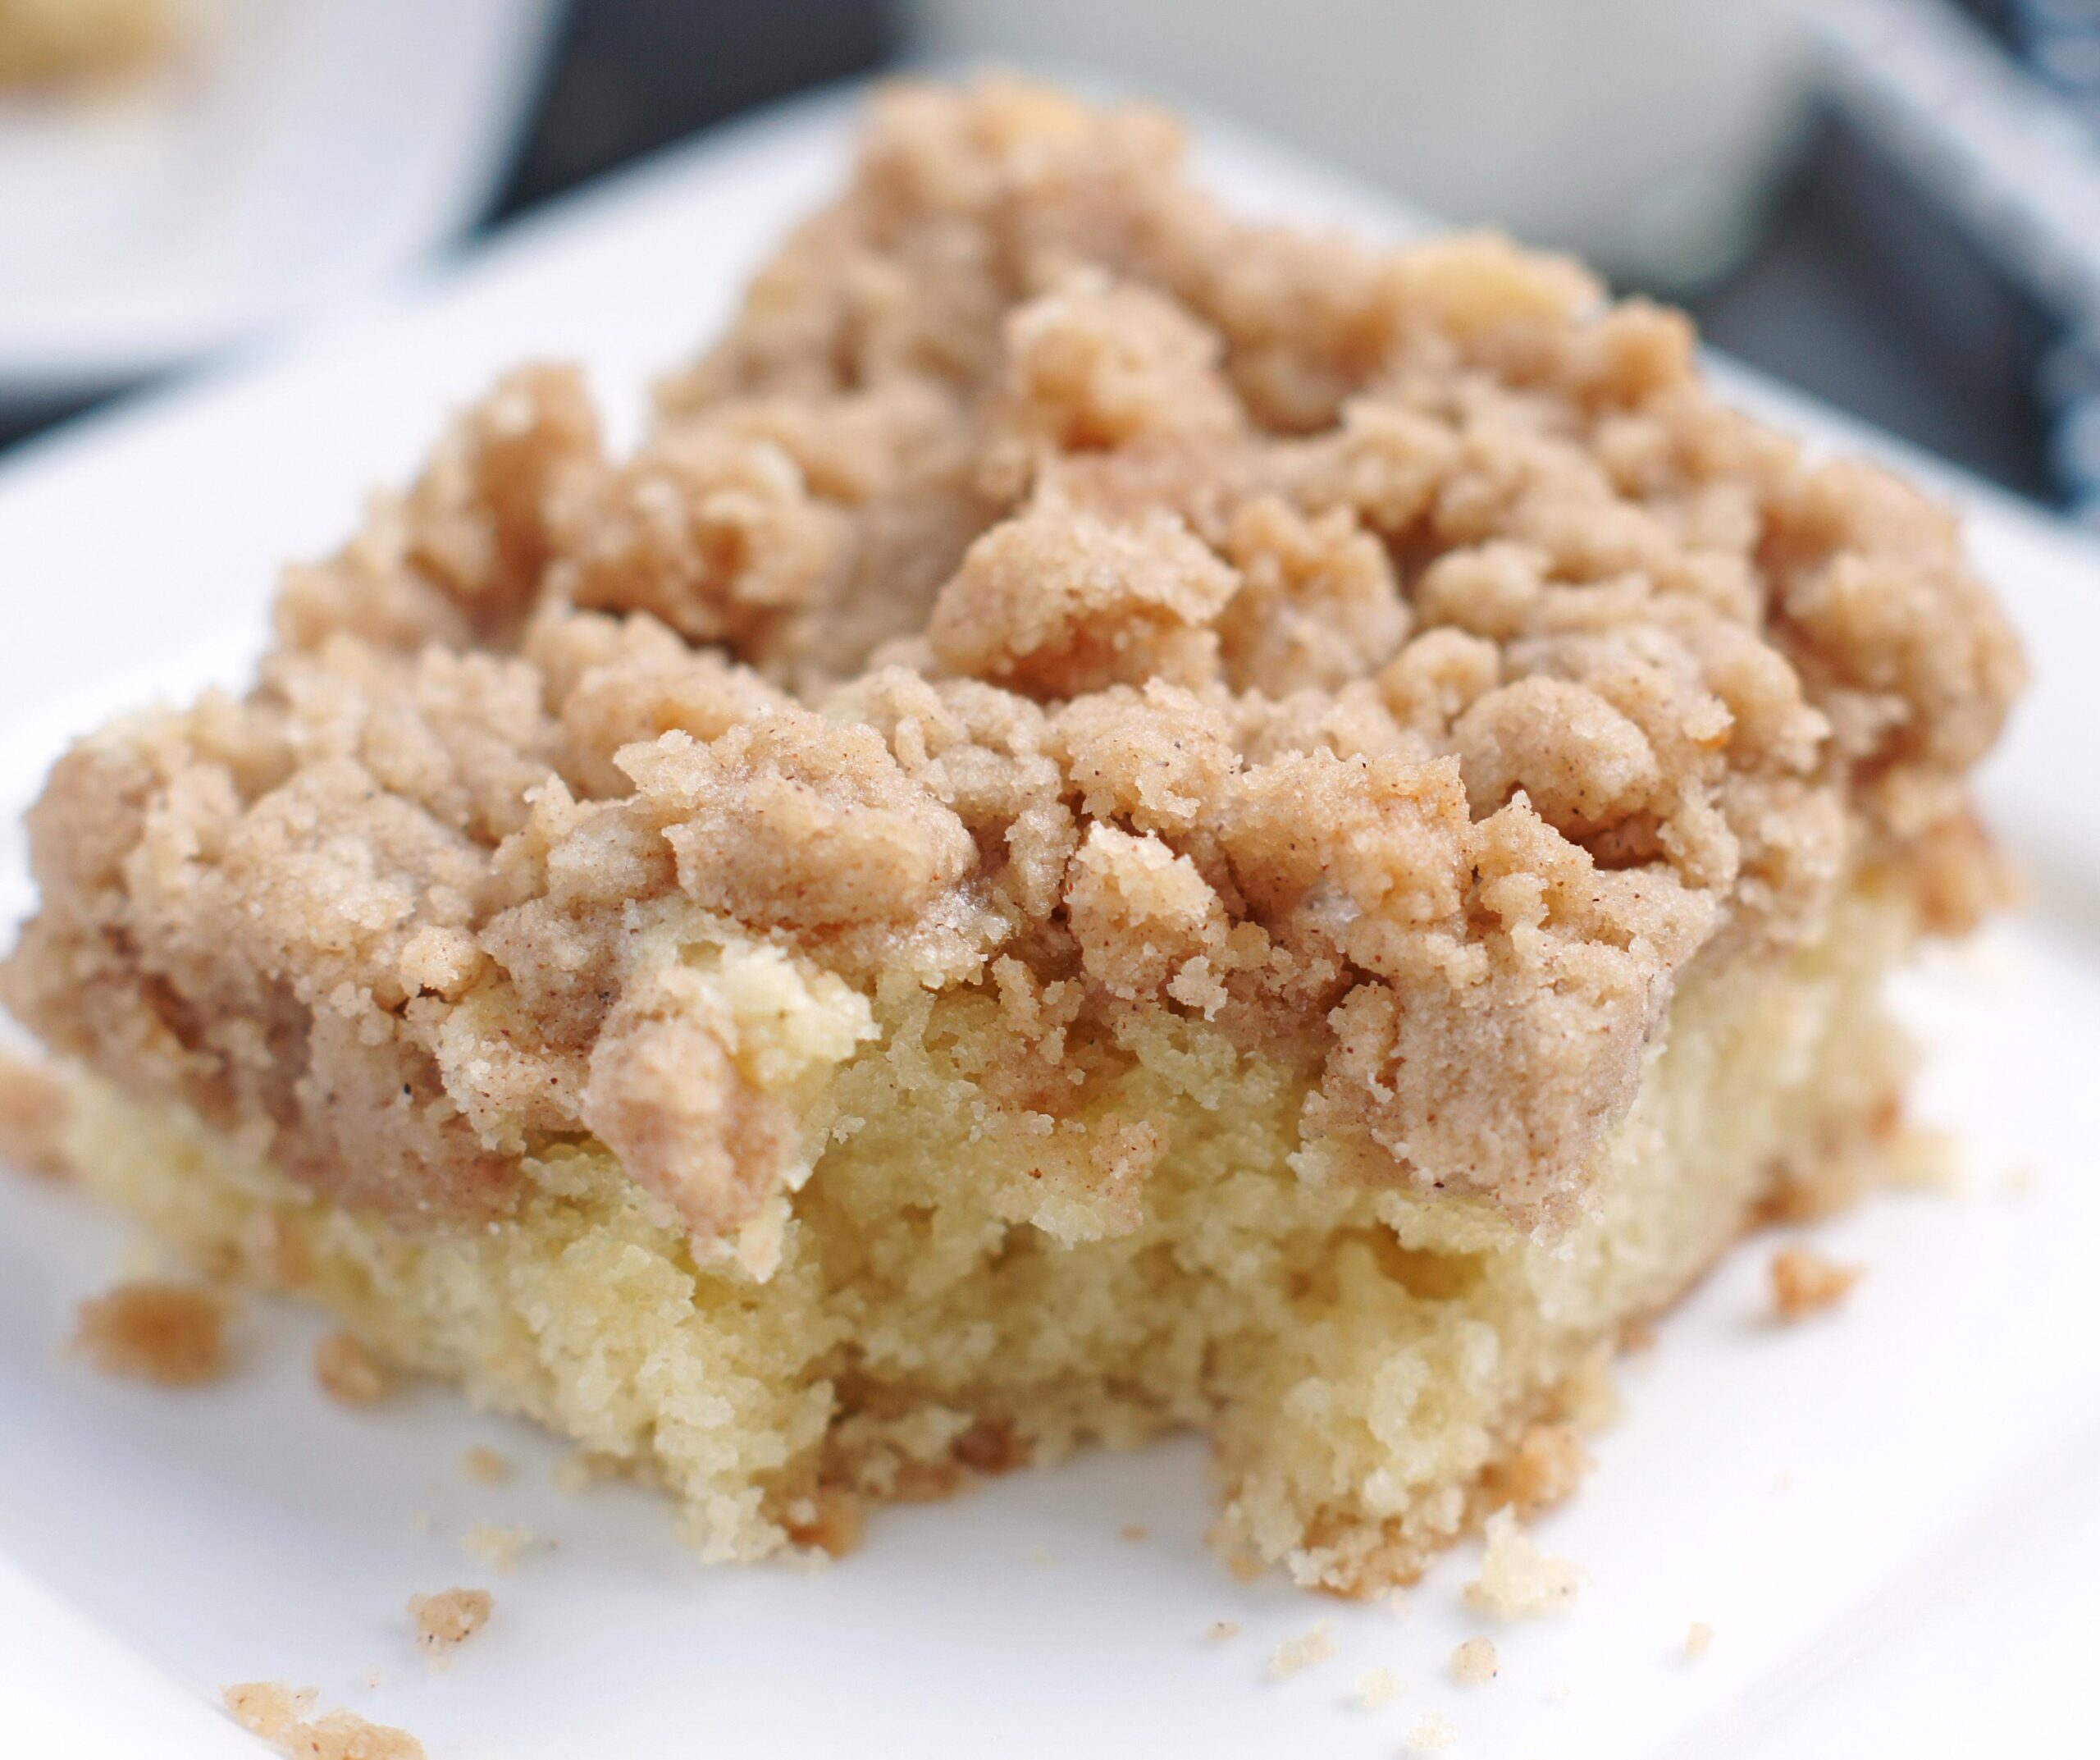  Perfect with a cup of coffee, this crumb cake will make your taste buds dance.